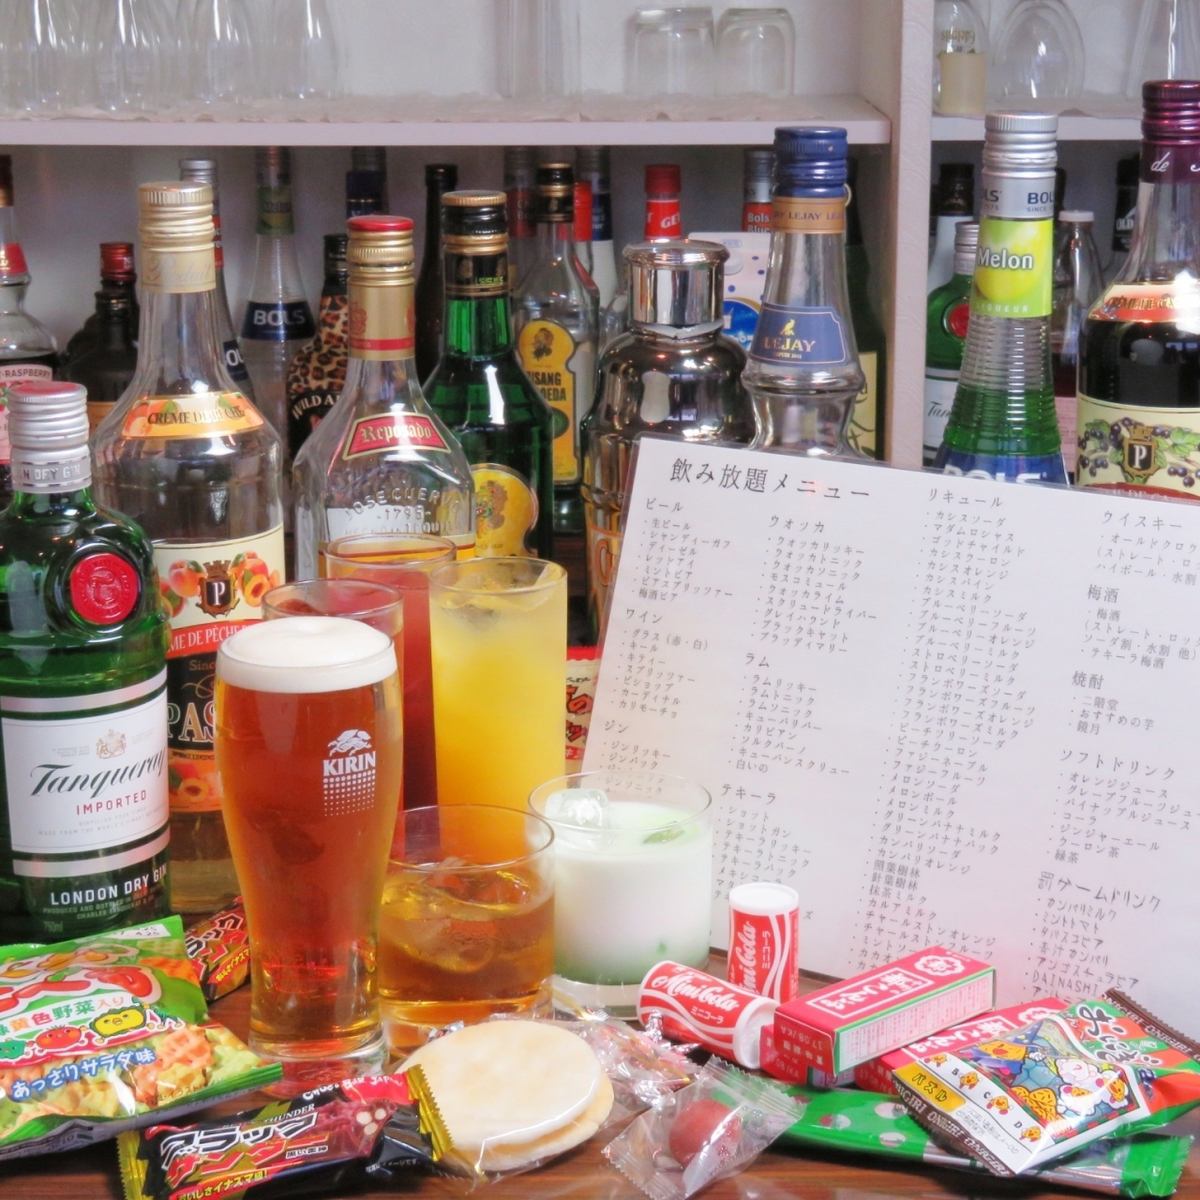 All-you-can-eat all-you-can-eat sweets with charge! Return at that nostalgic time ... a bar for adults